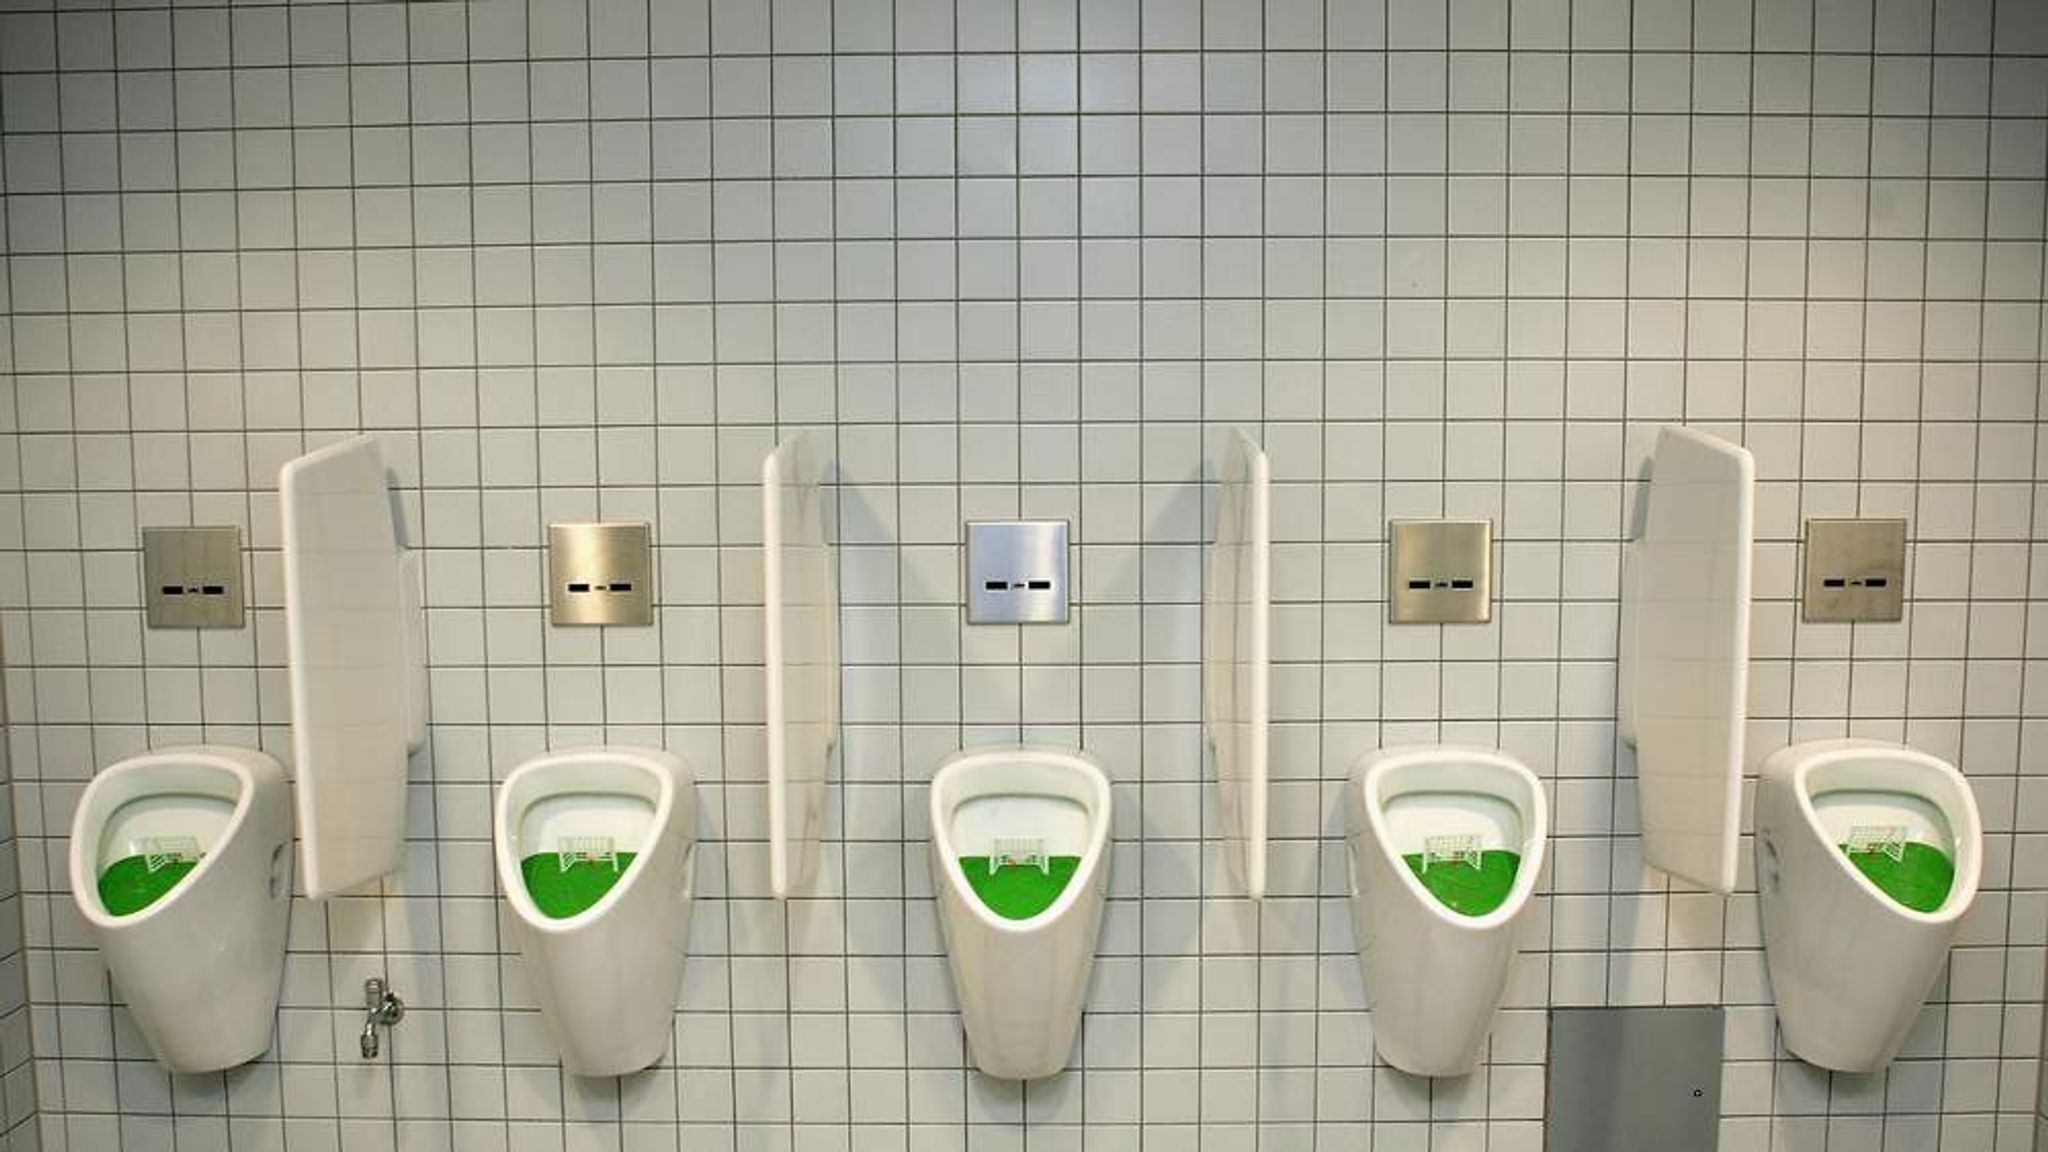 Splash-Free Urinal Unveiled By Physicists.